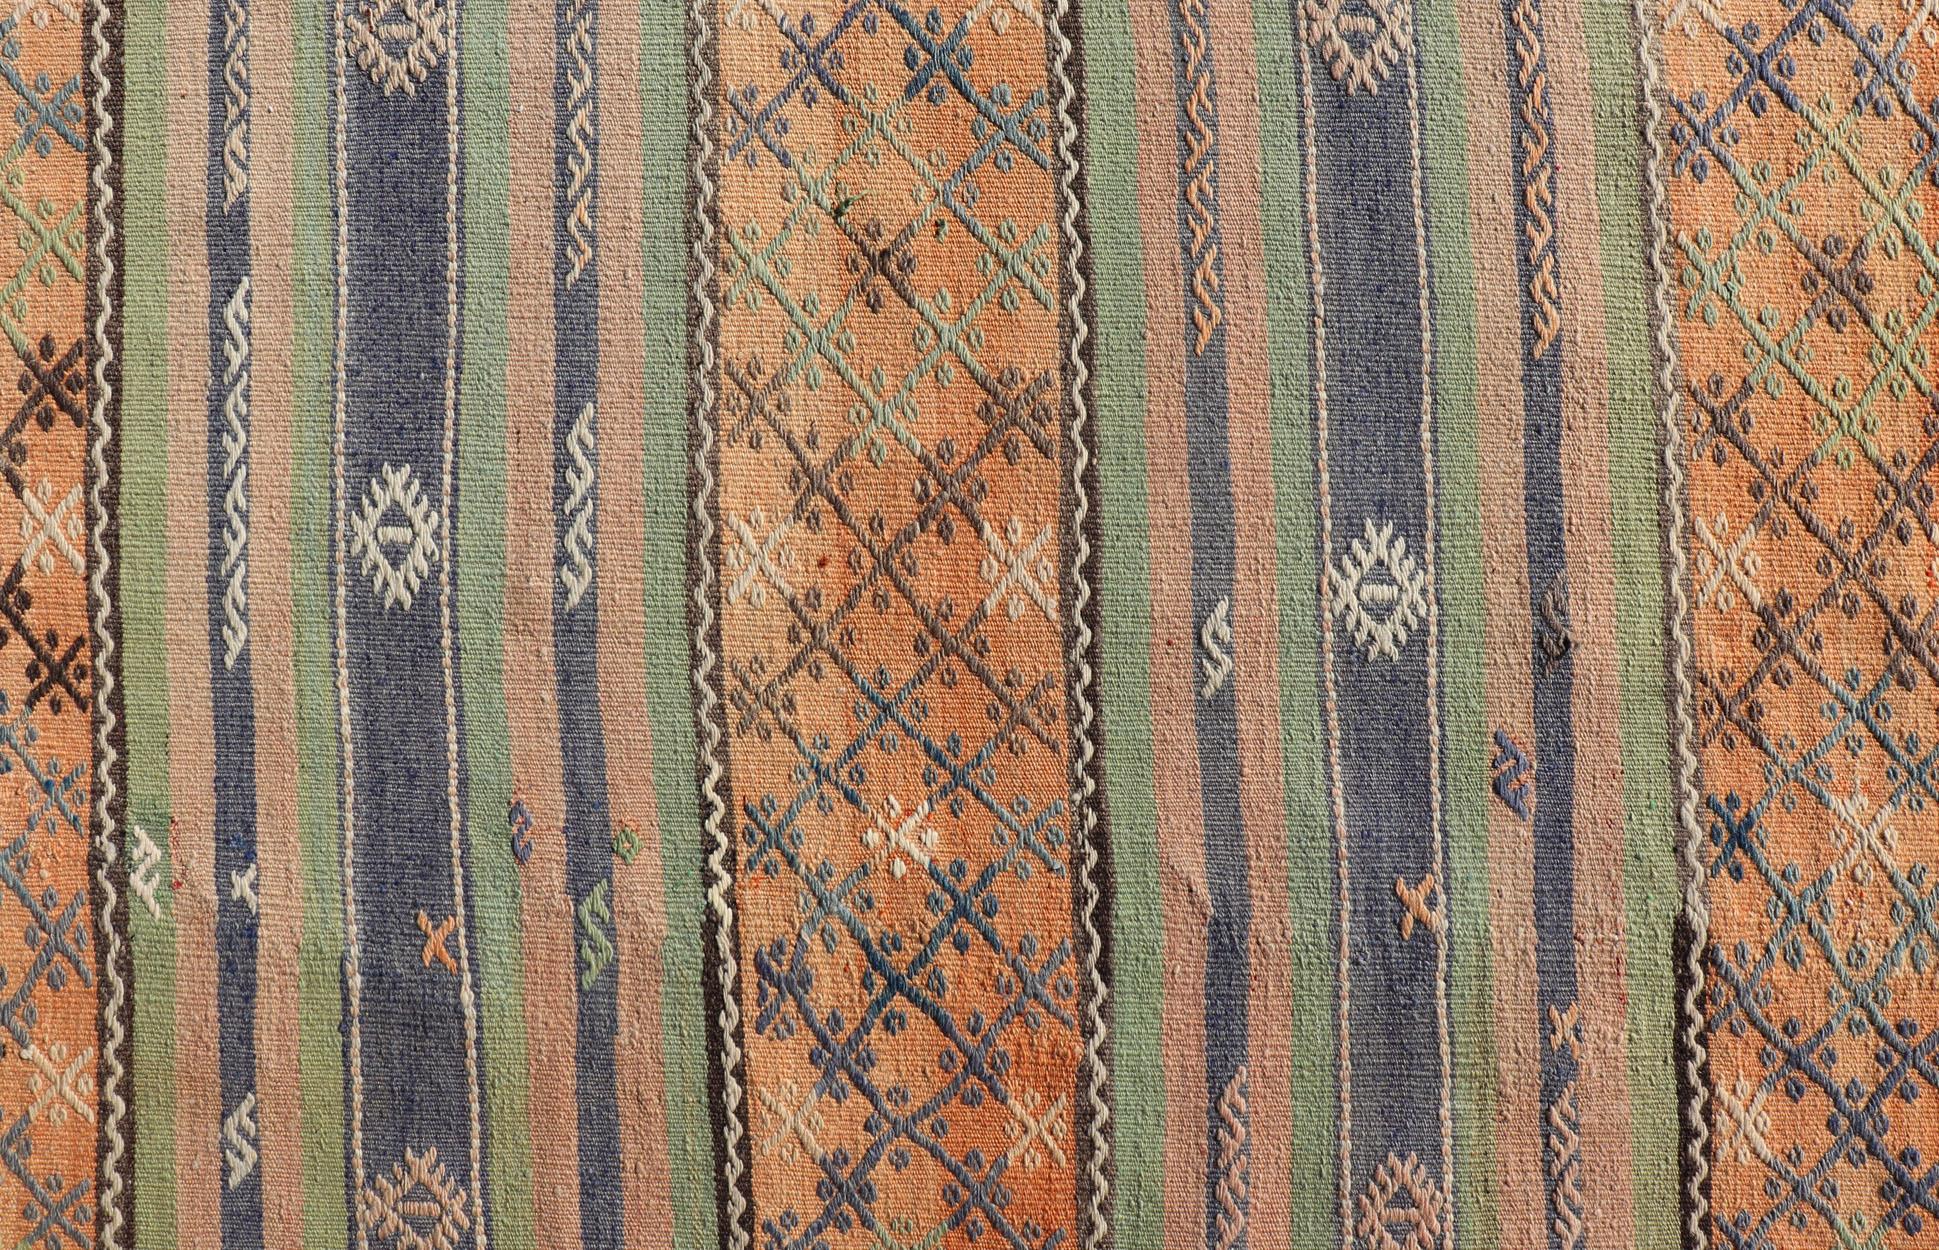 20th Century Colorful Turkish Kilim with Stripes and Geometric Elements in Orange and Green For Sale